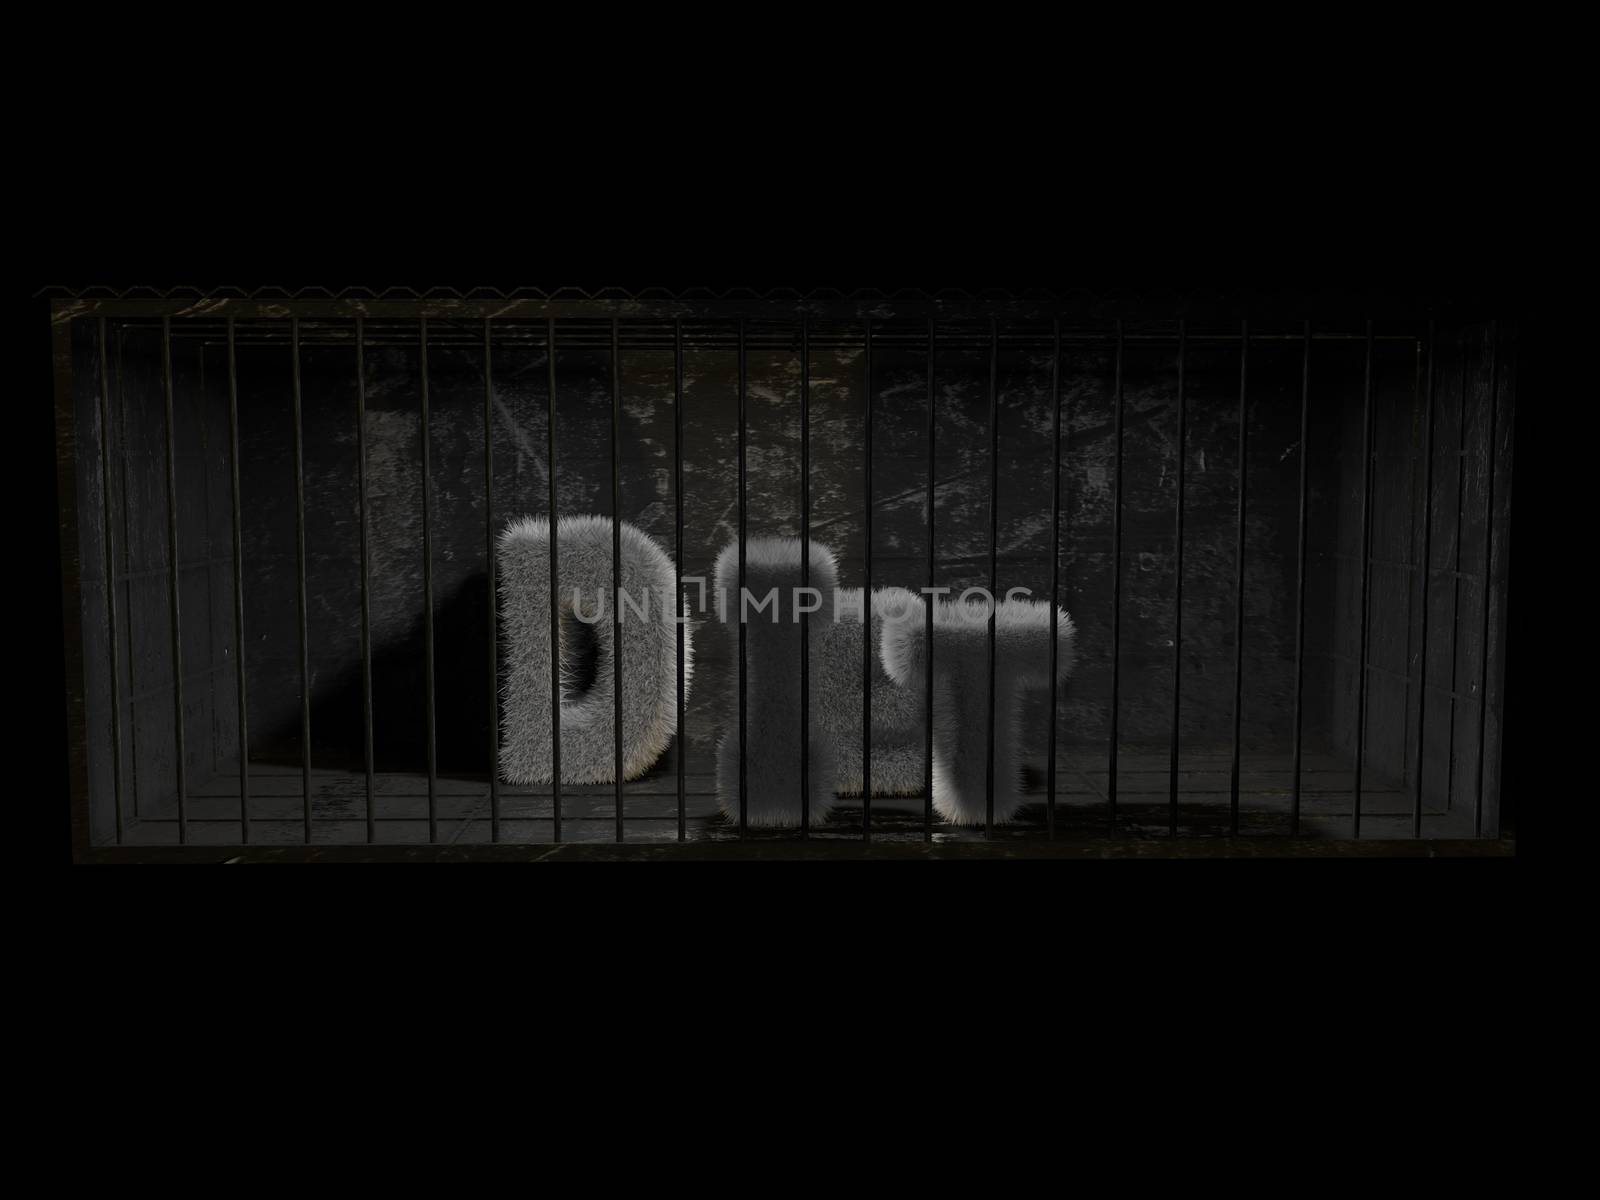 A fluffy word (diet) with white hair behind bars with black background.